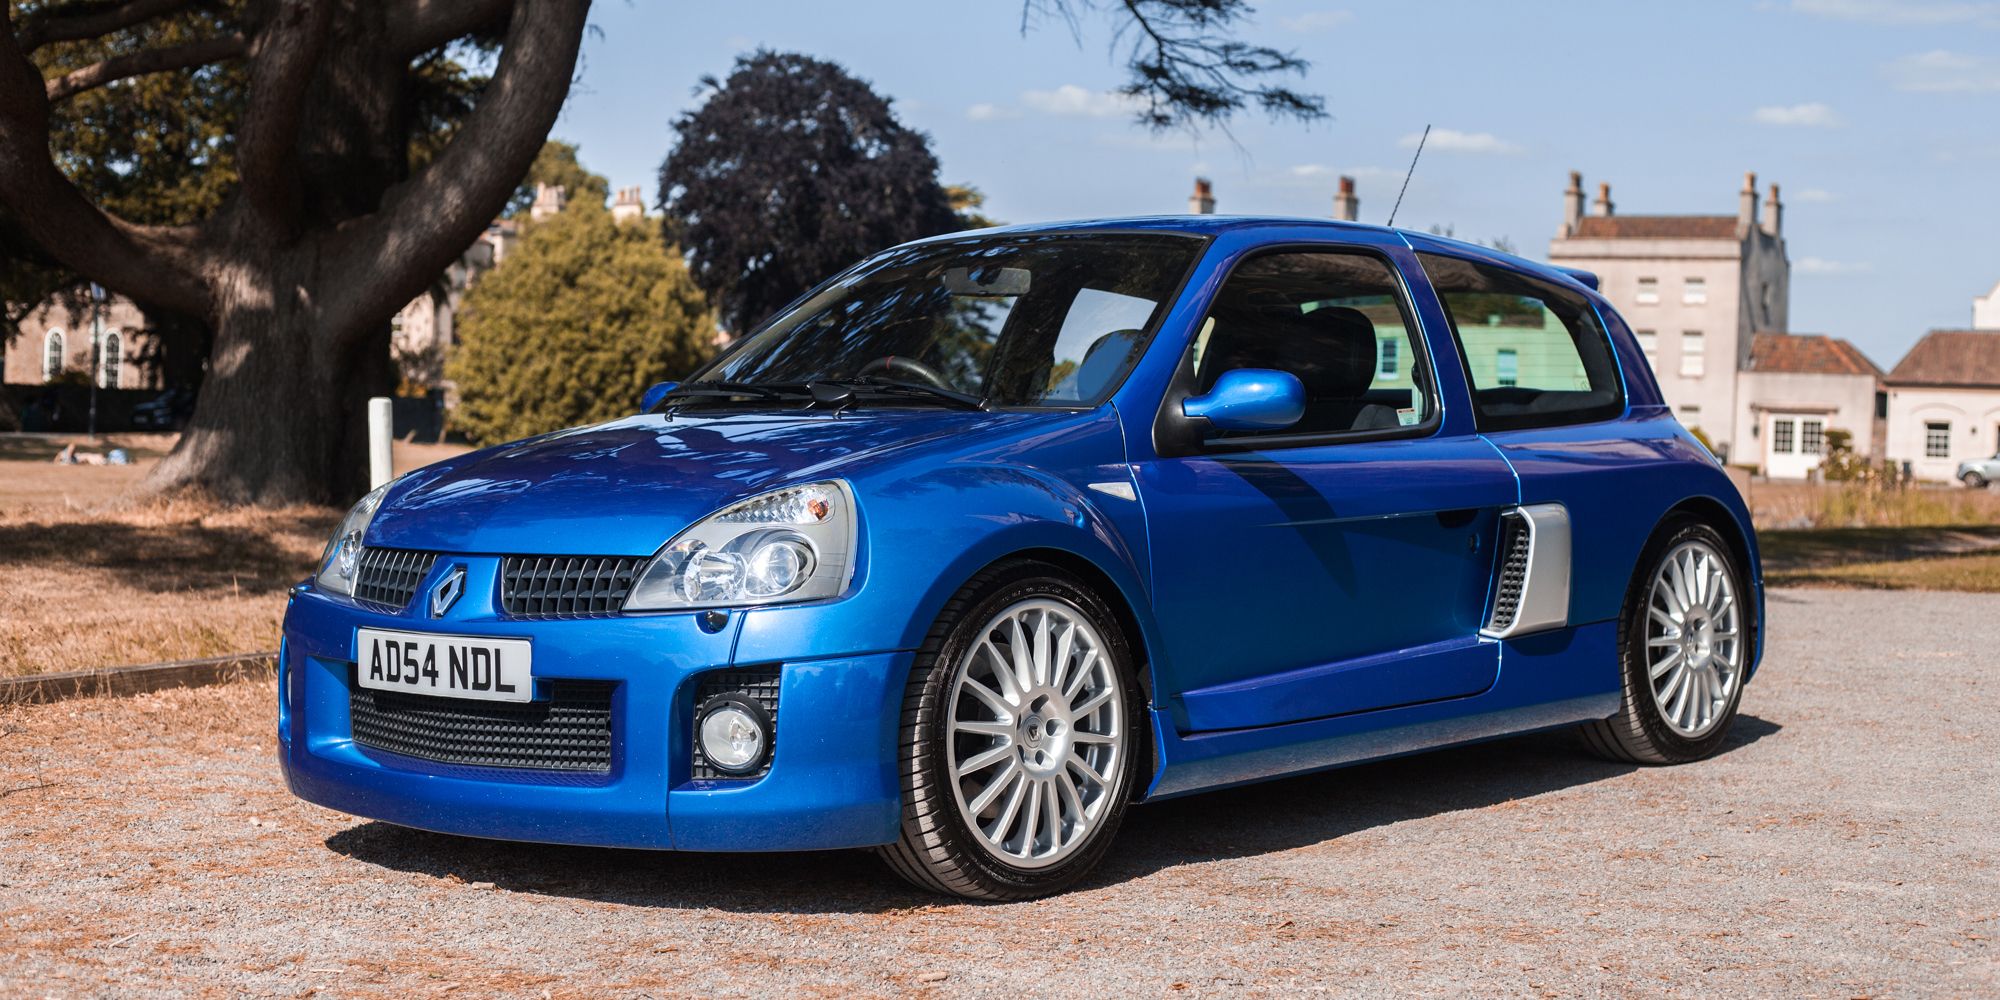 A Phase II Clio V6 in blue